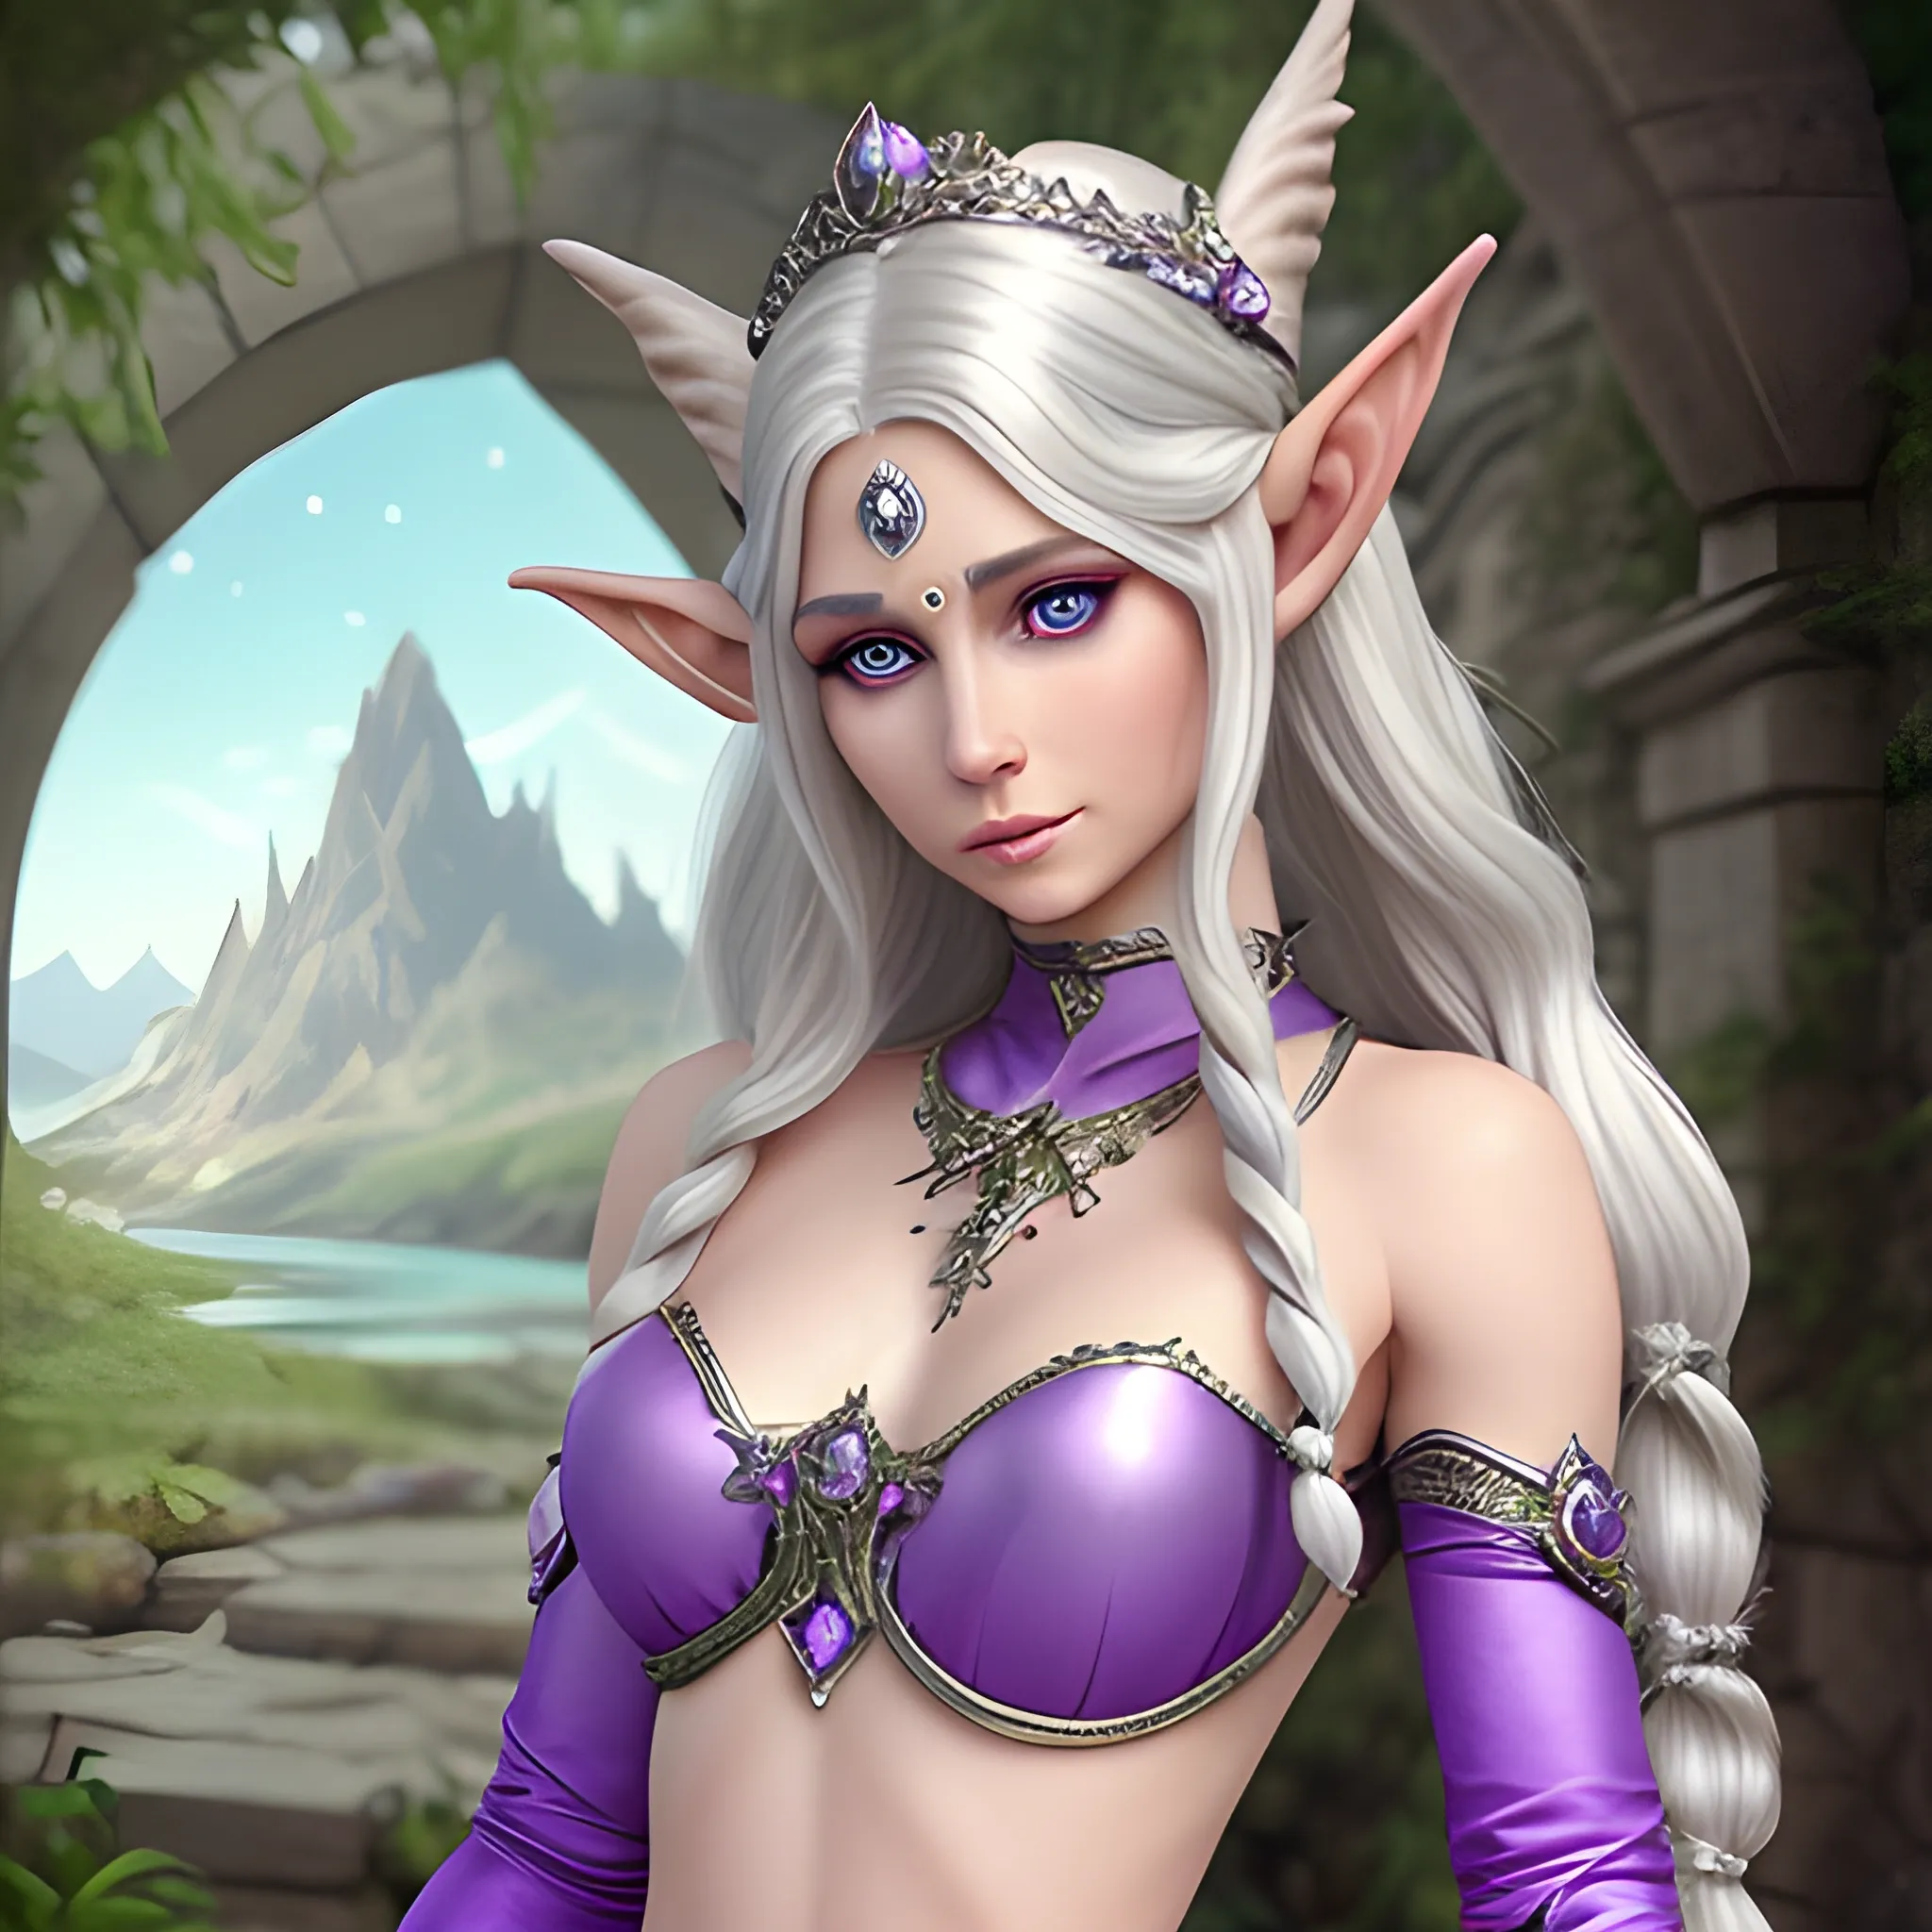 realistic fantasy female elf with long curling silver hair and purple eyes. Jeweled ears and body. Dewy skin, soft features queenly